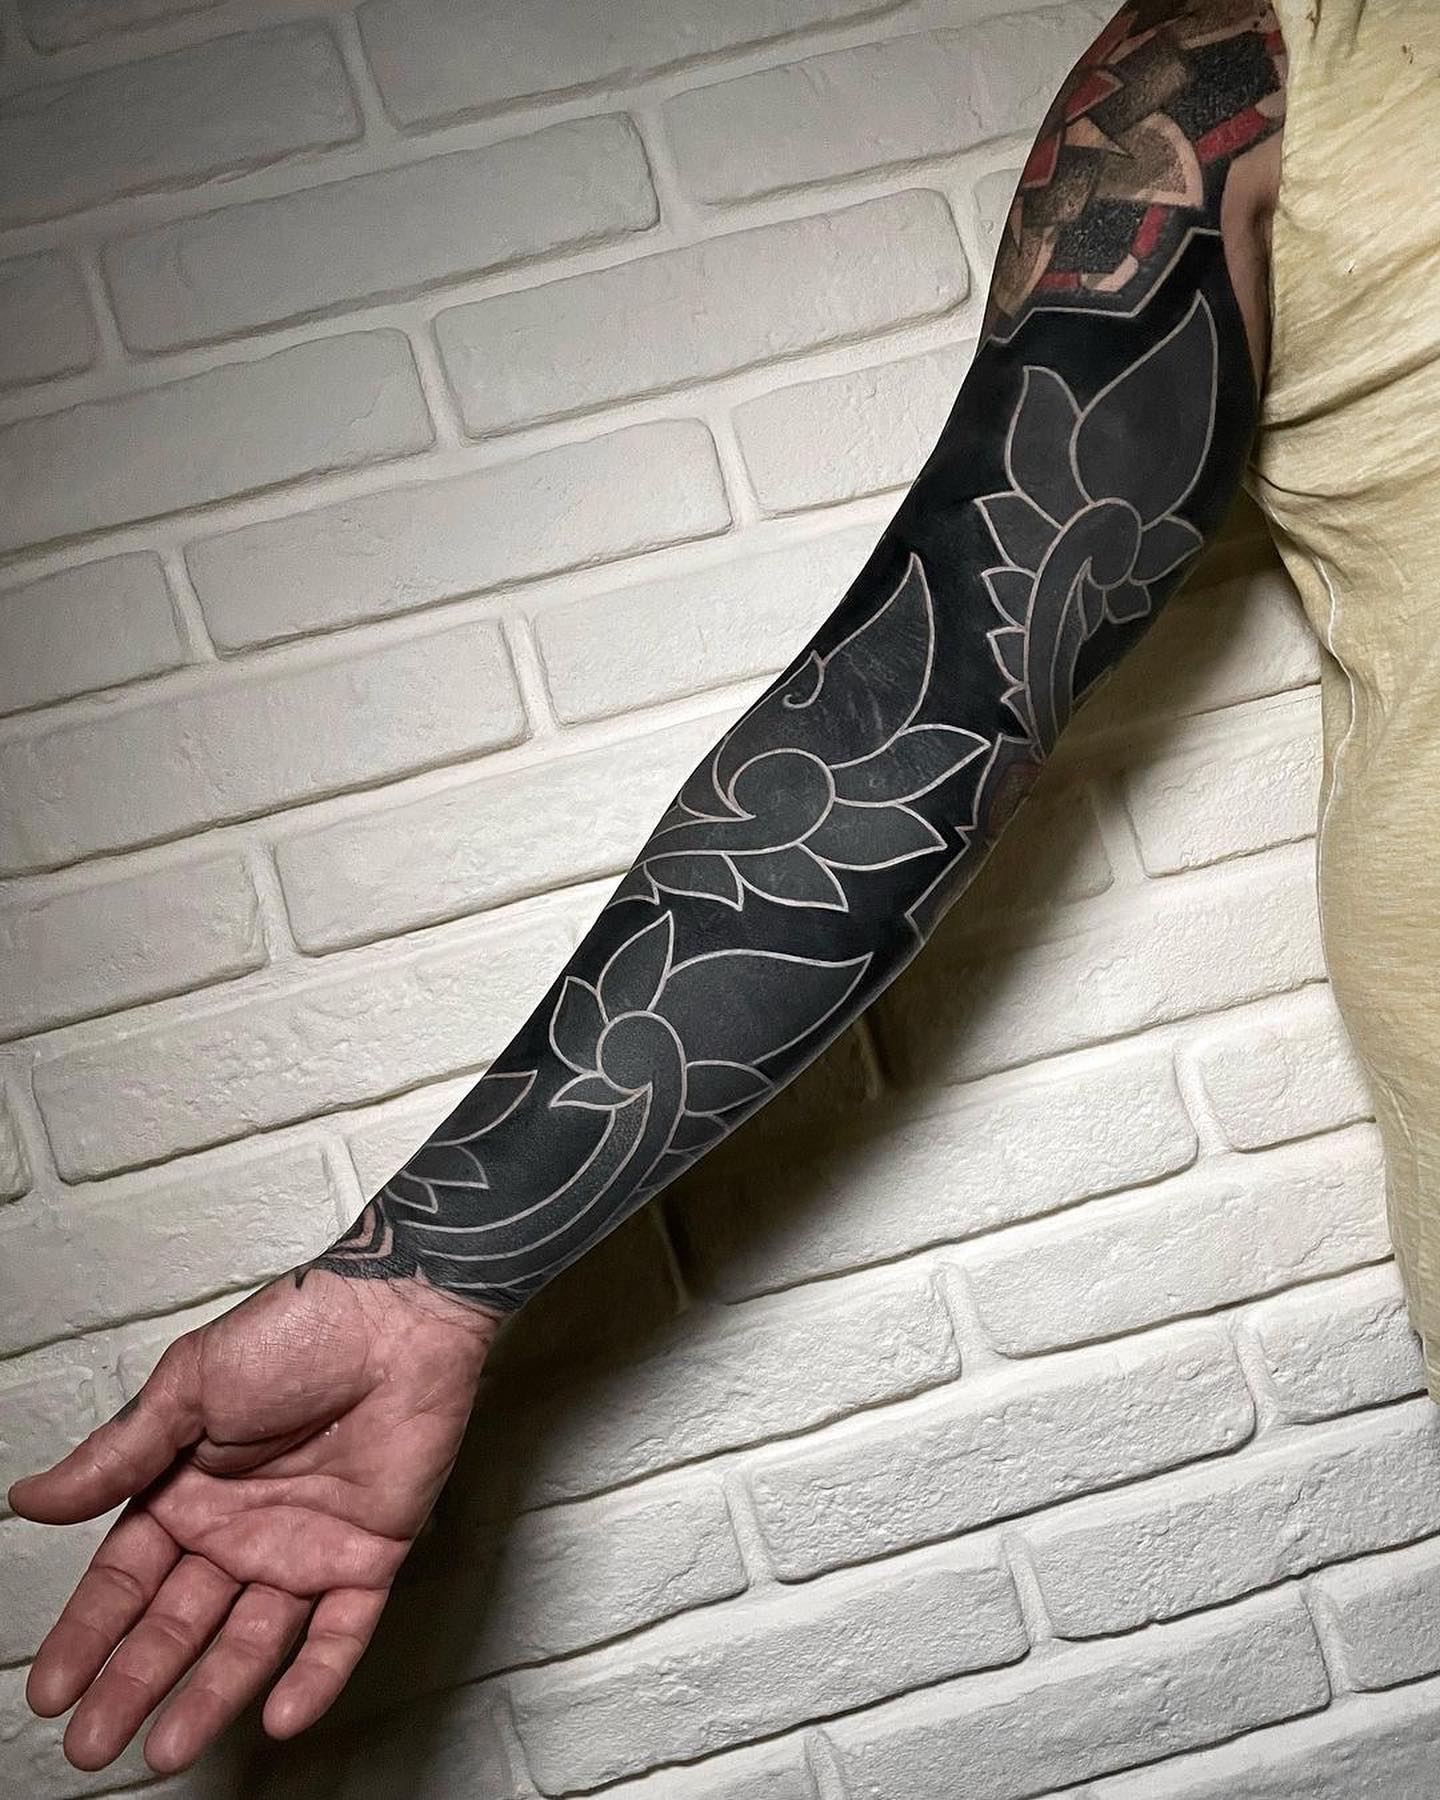 Blackout tattoo trend has people covering bodies in solid ink